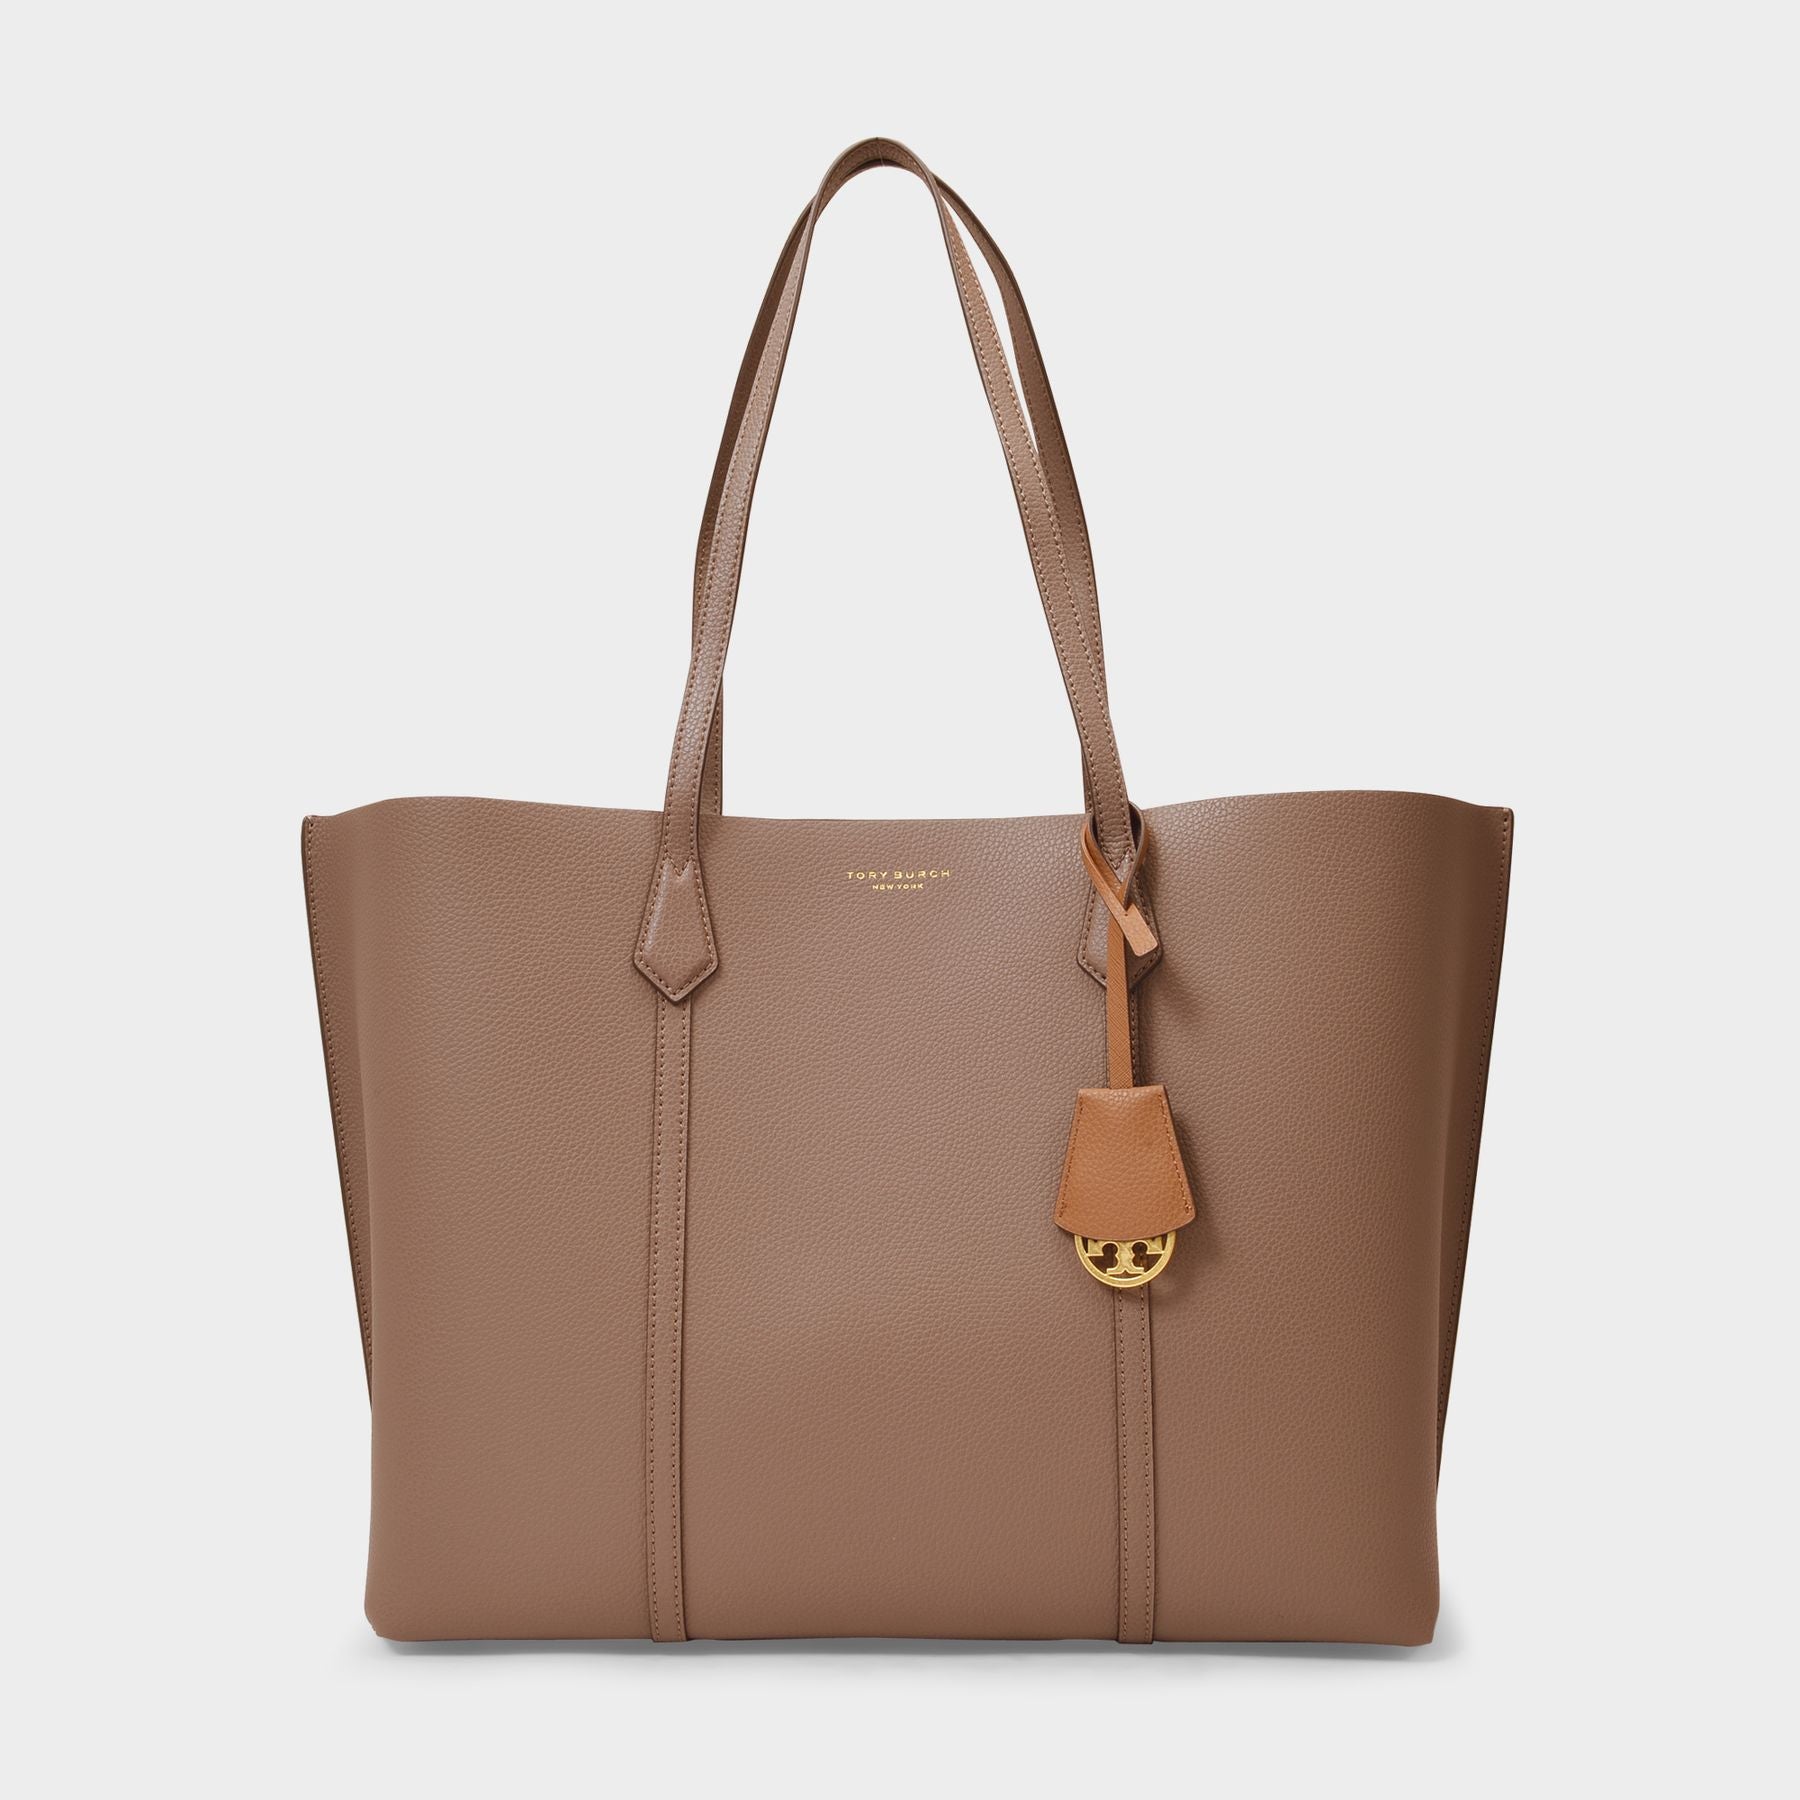 Perry Tote Bag - Tory Burch - Clam Shell - Leather